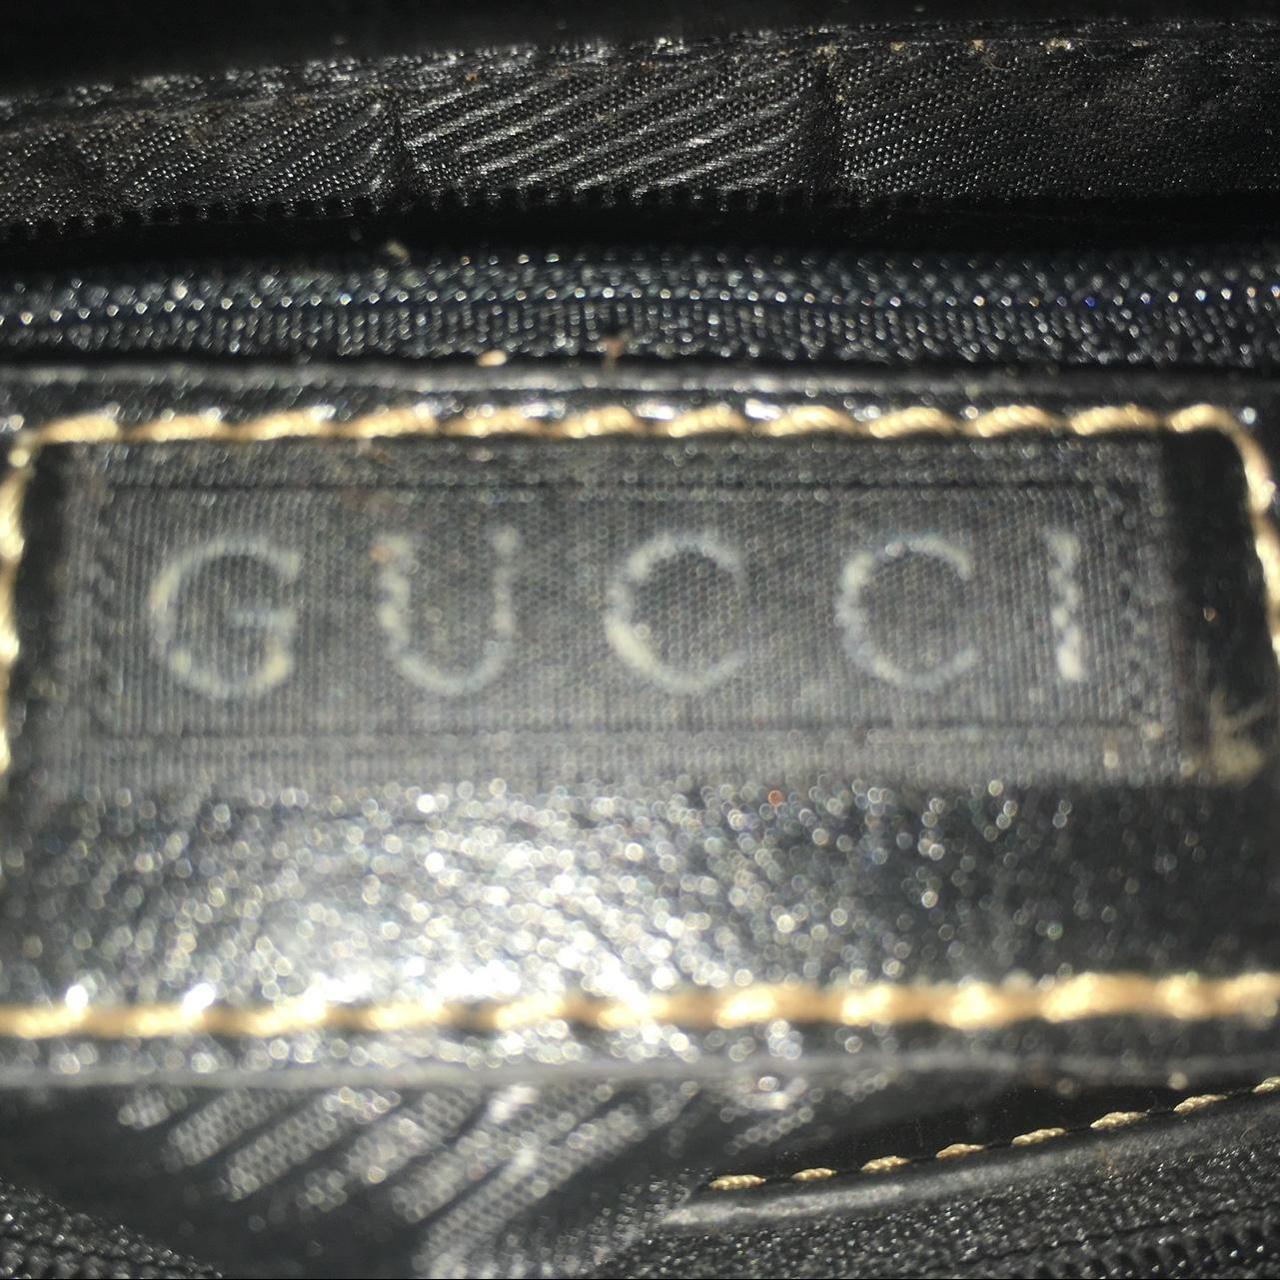 1980s vintage Gucci Doctor bag- I was gifted this - Depop